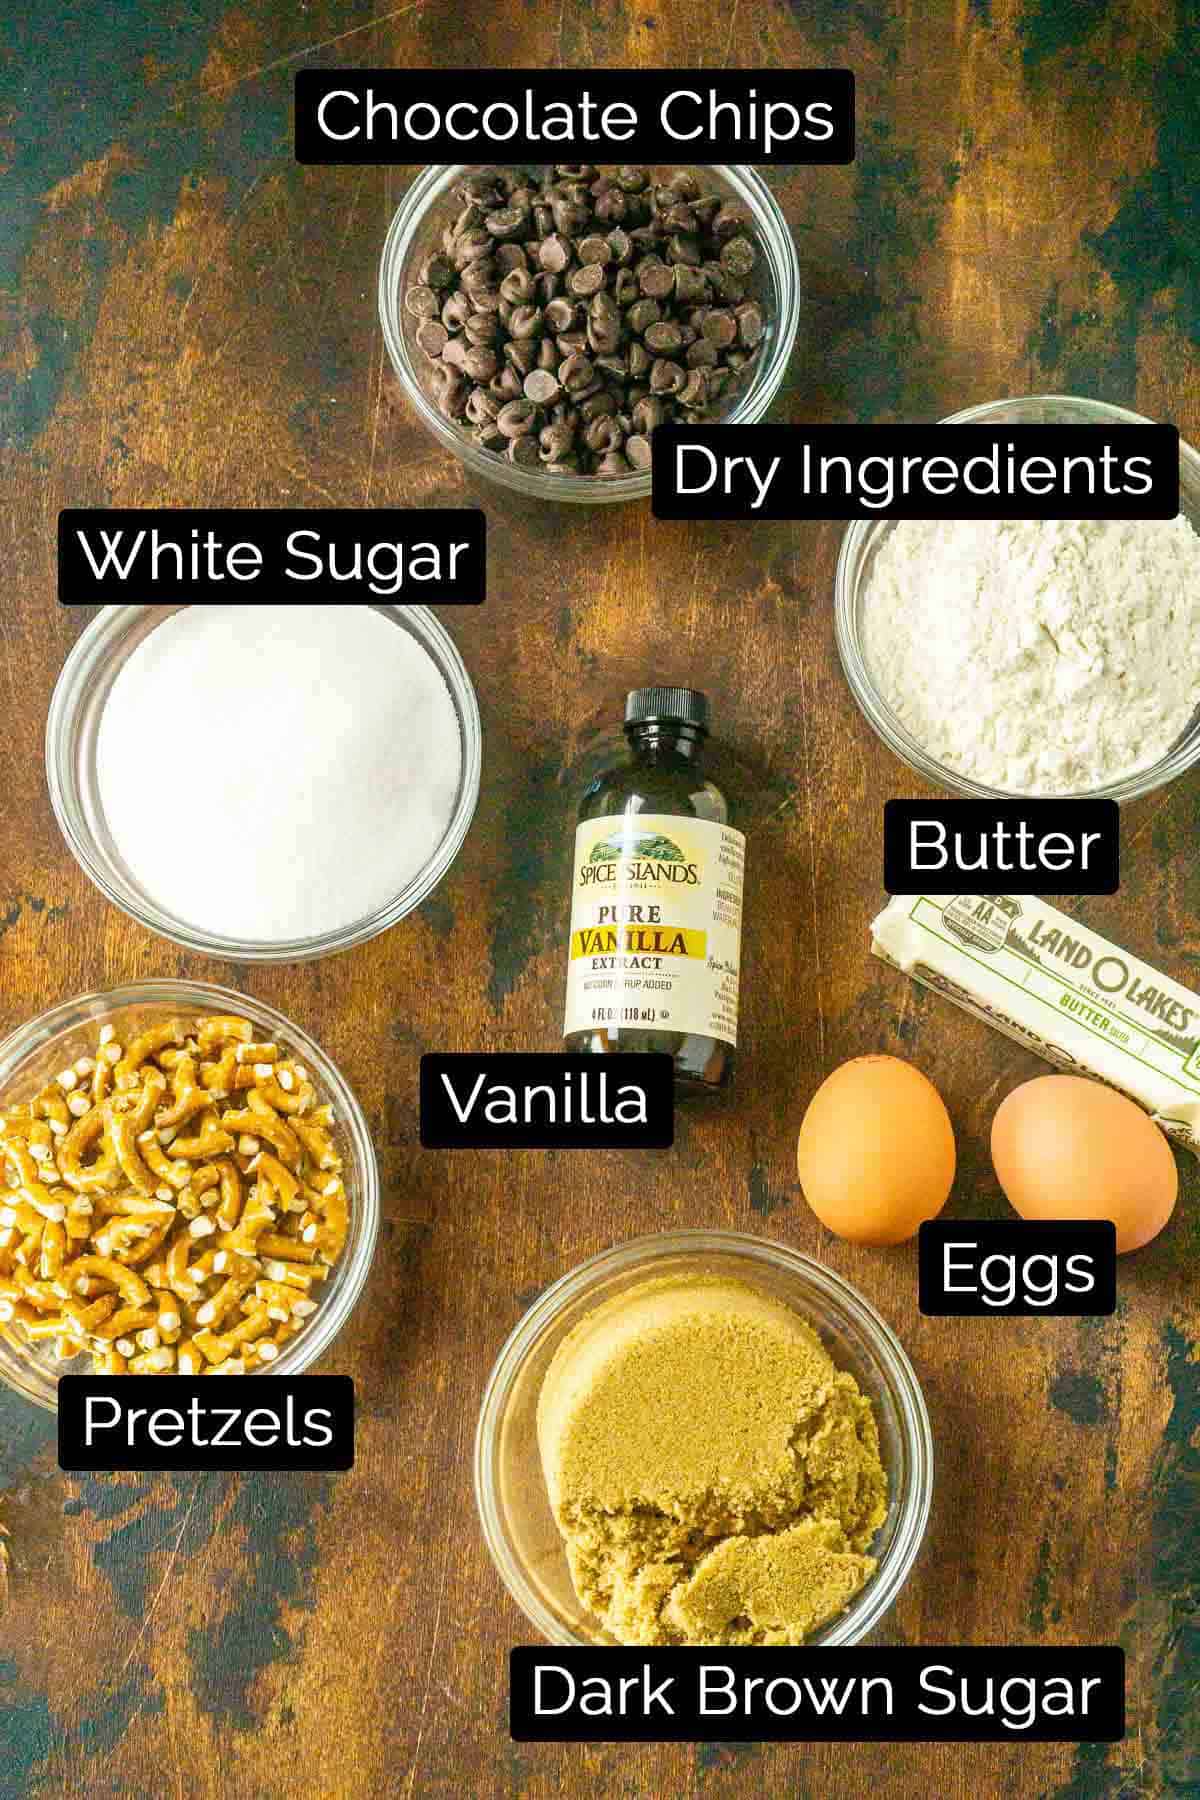 The pretzel chocolate chip ingredients on a wooden board with labels.